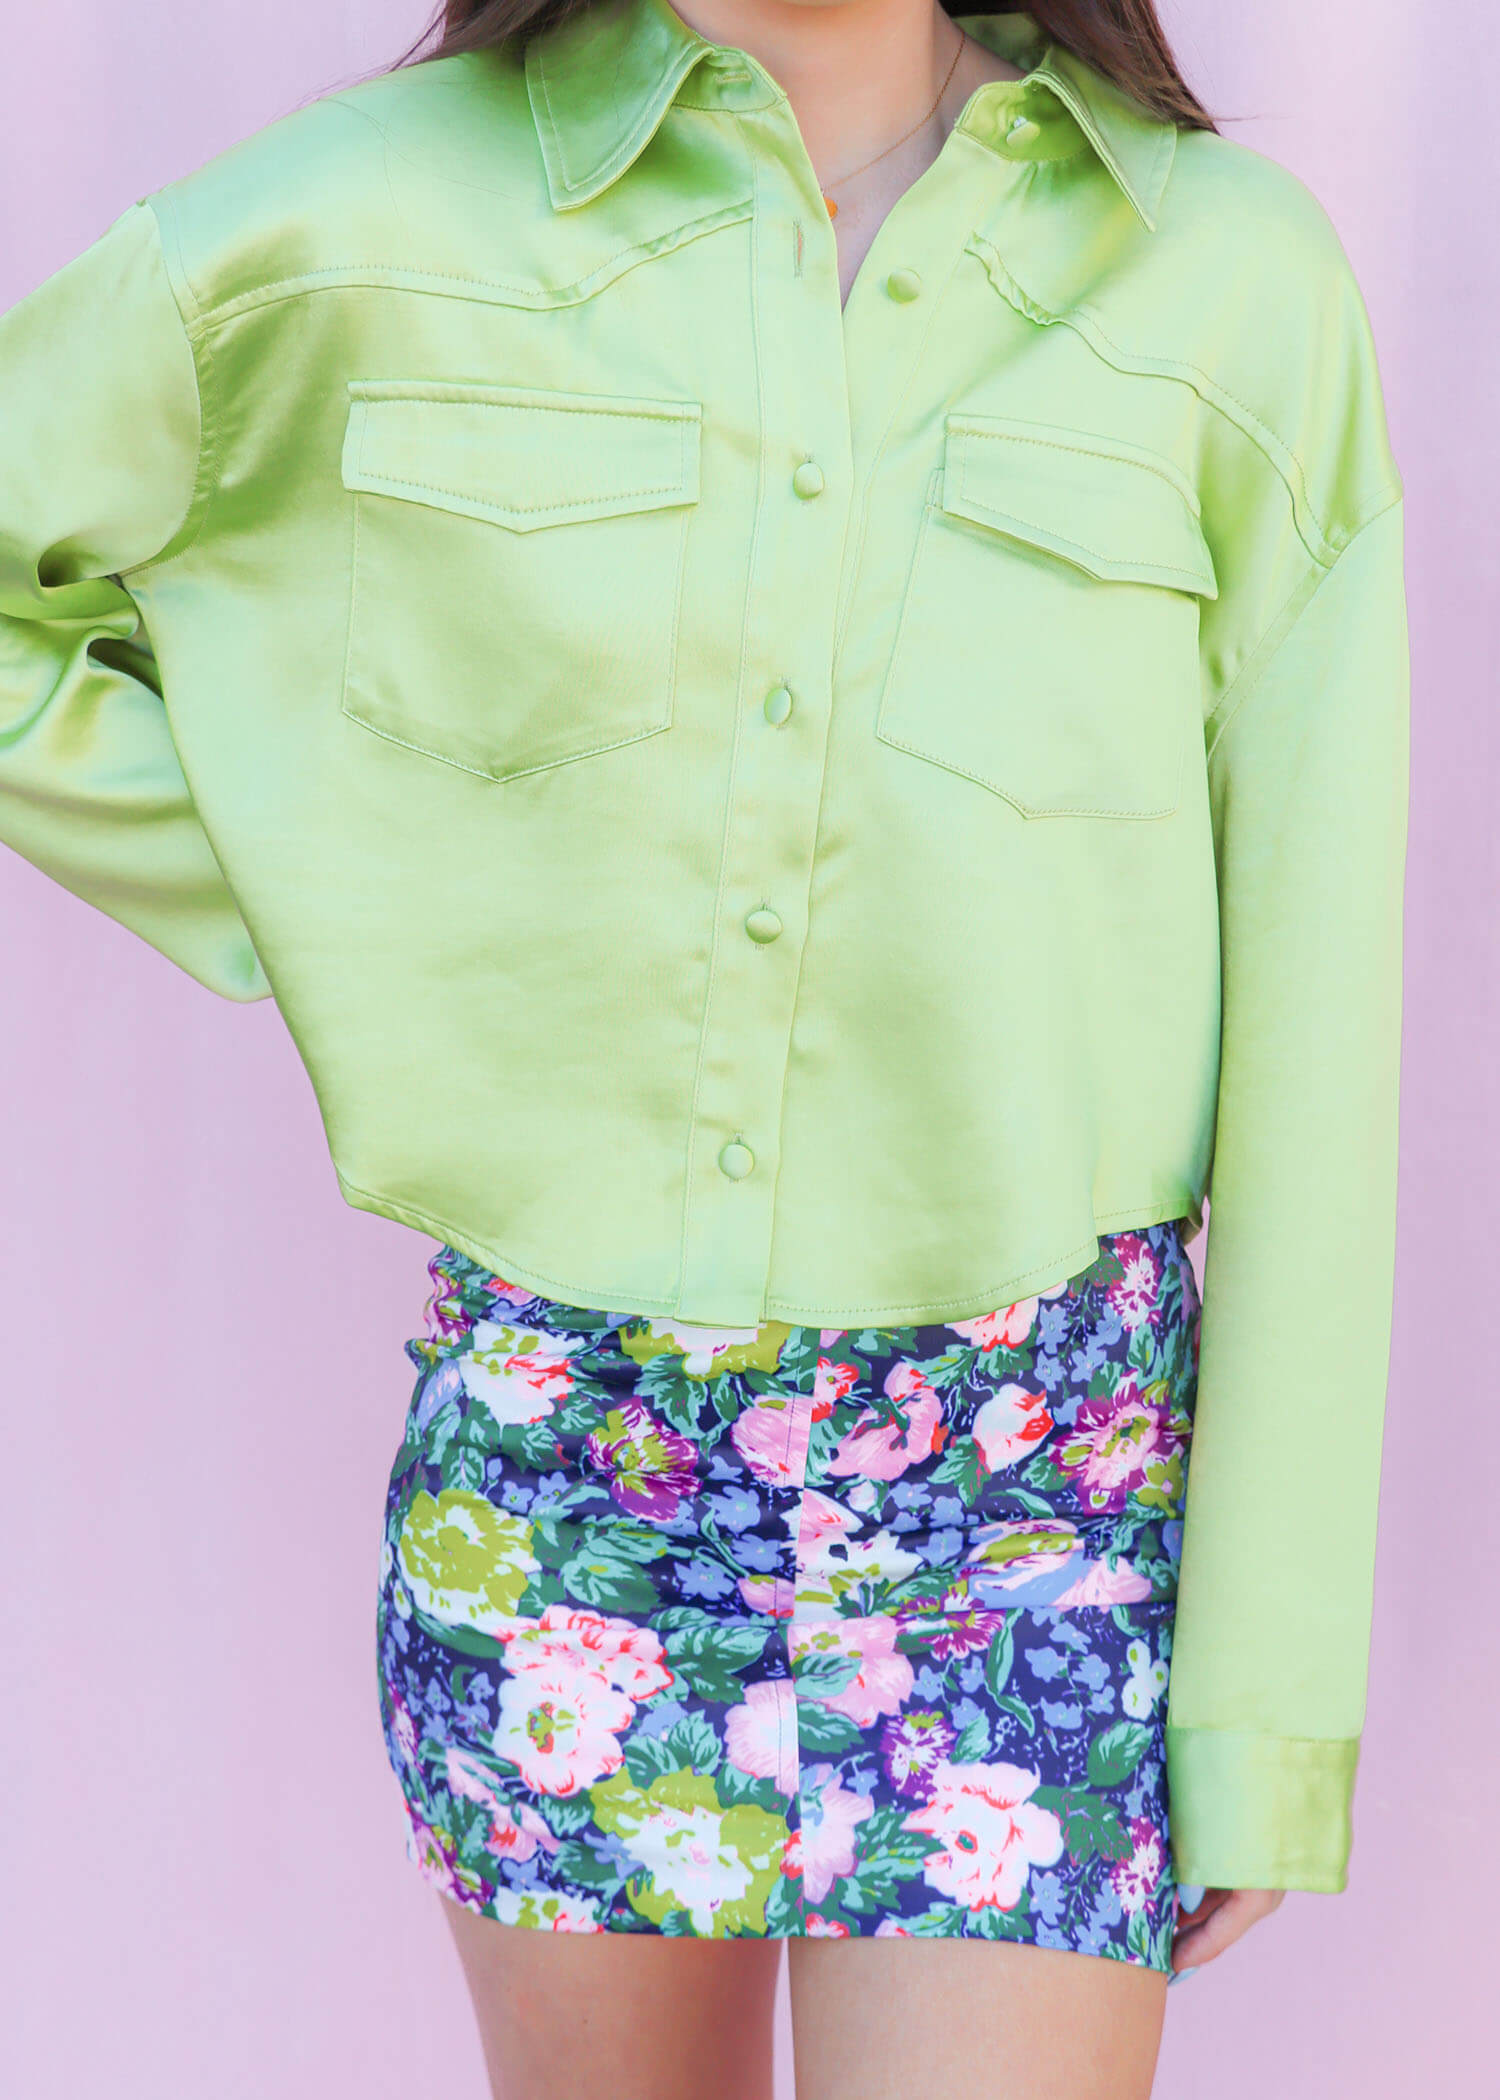 What About It Button-Up - Light Green Jacket MerciGrace Boutique.